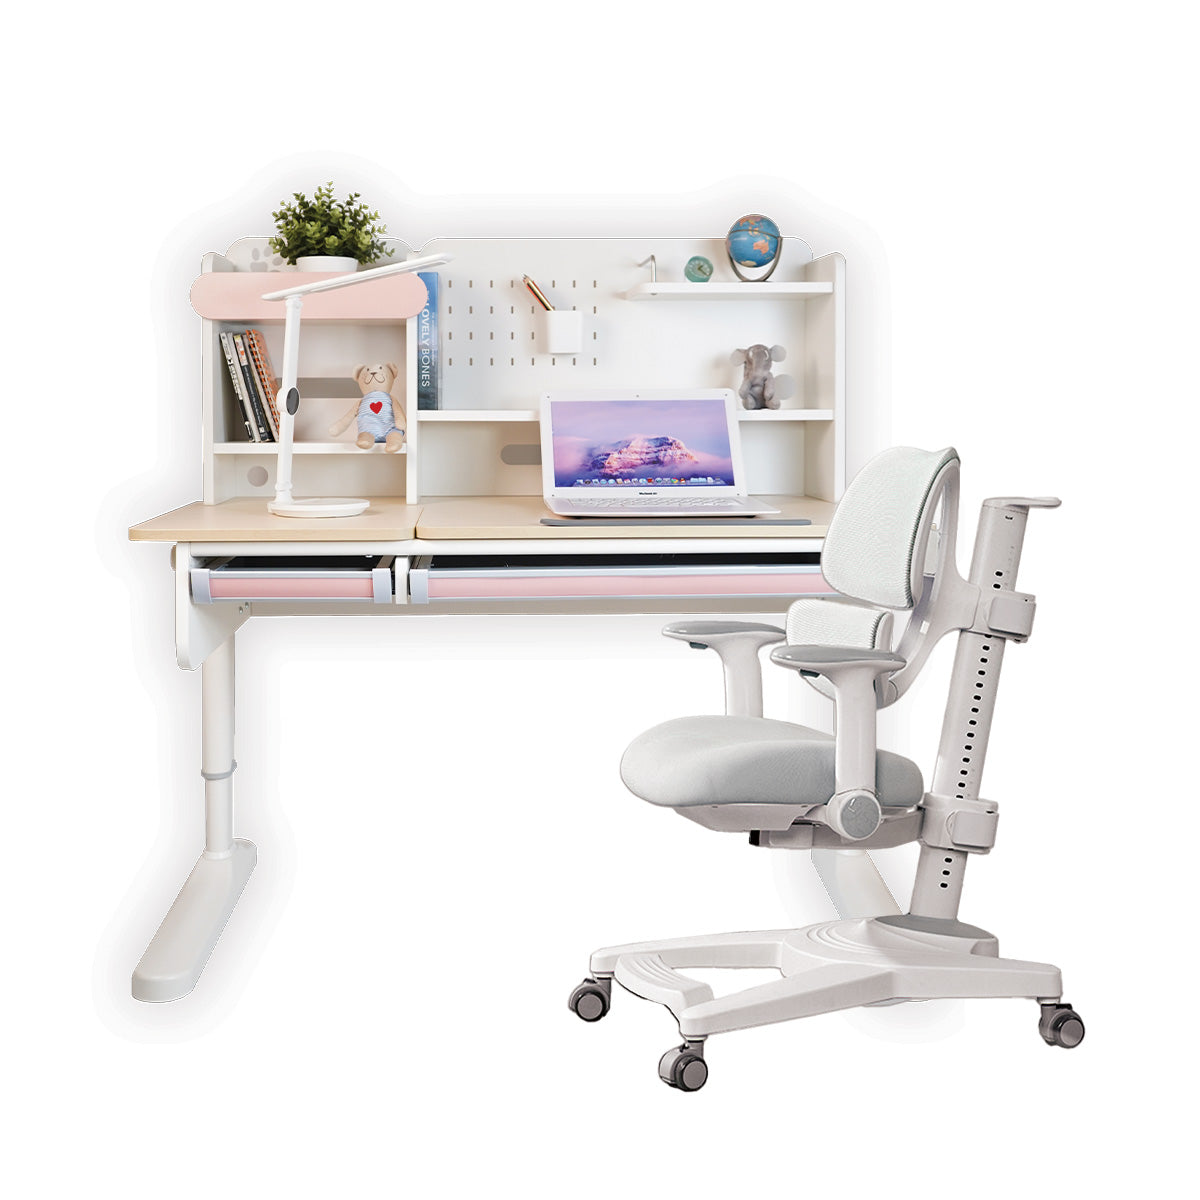 Impact Ergo-Growing Study Desk And Chair Set 1200mm x 650mm, IM-G1200-